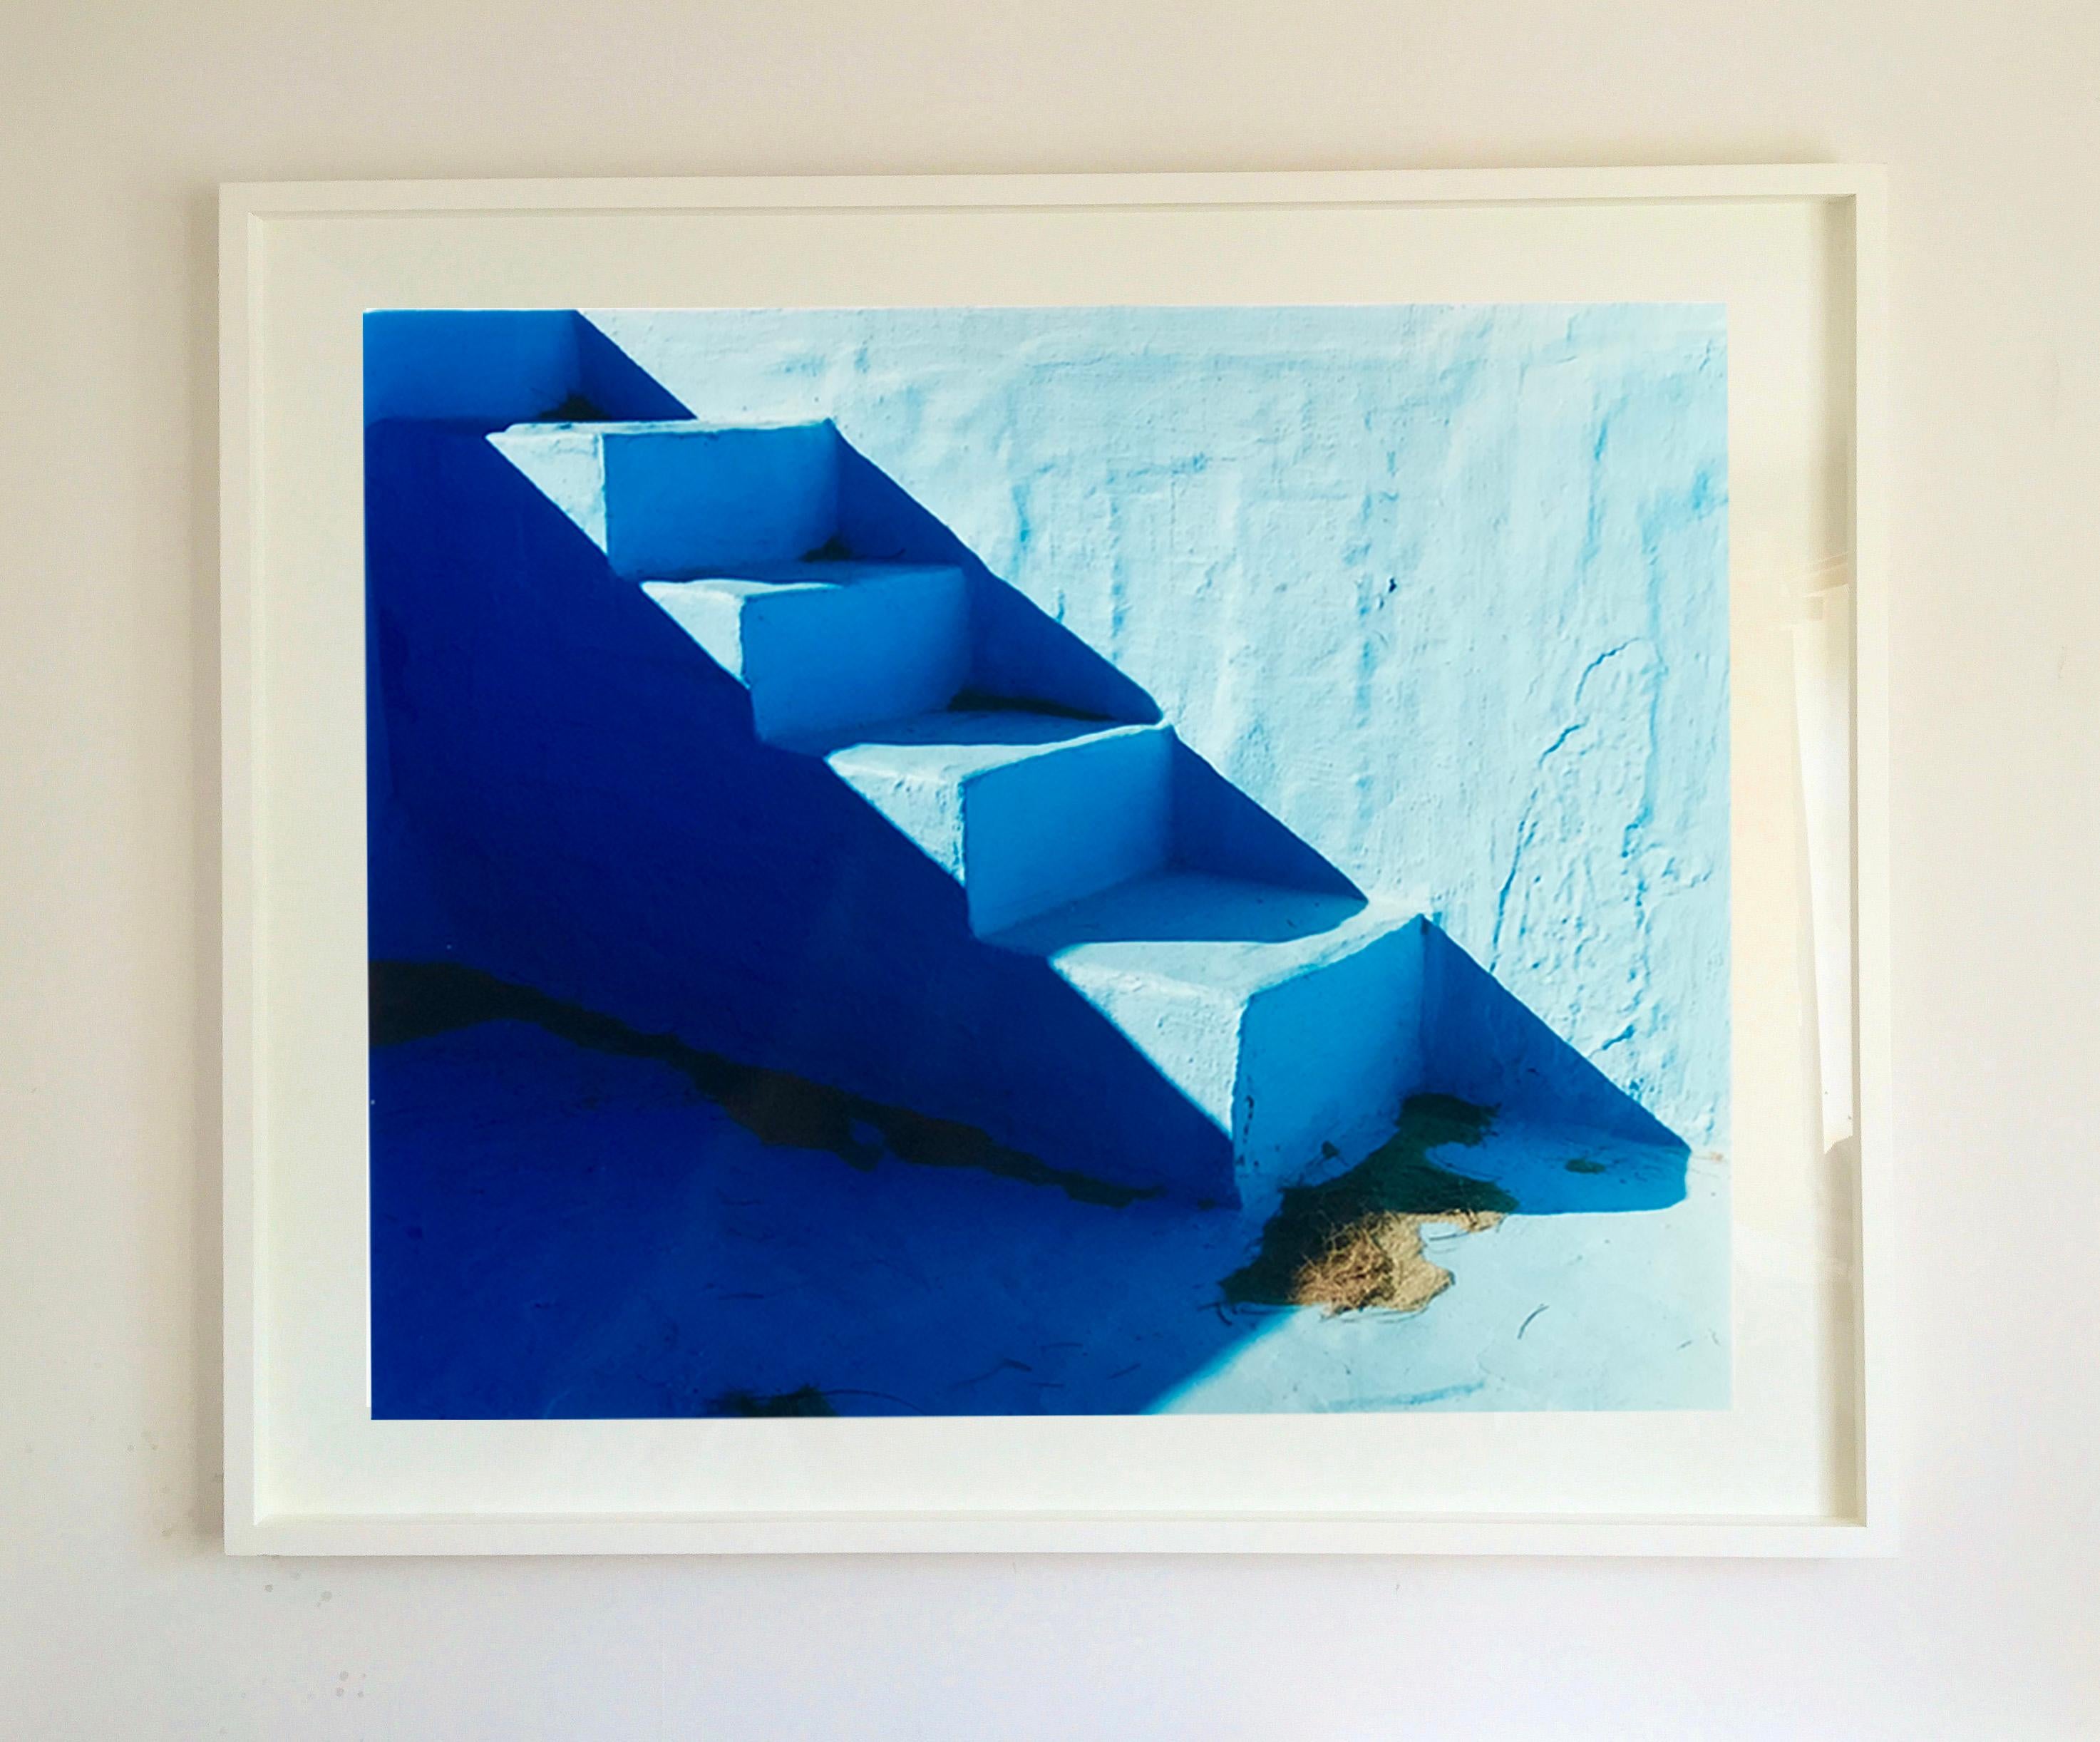 Minimalist California summer vibes in this blue picture from Richard Heeps 'Dream in Colour' Series.

This artwork is a limited edition of 25, gloss photographic print, dry-mounted to aluminium, it is presented in a museum board white window mount